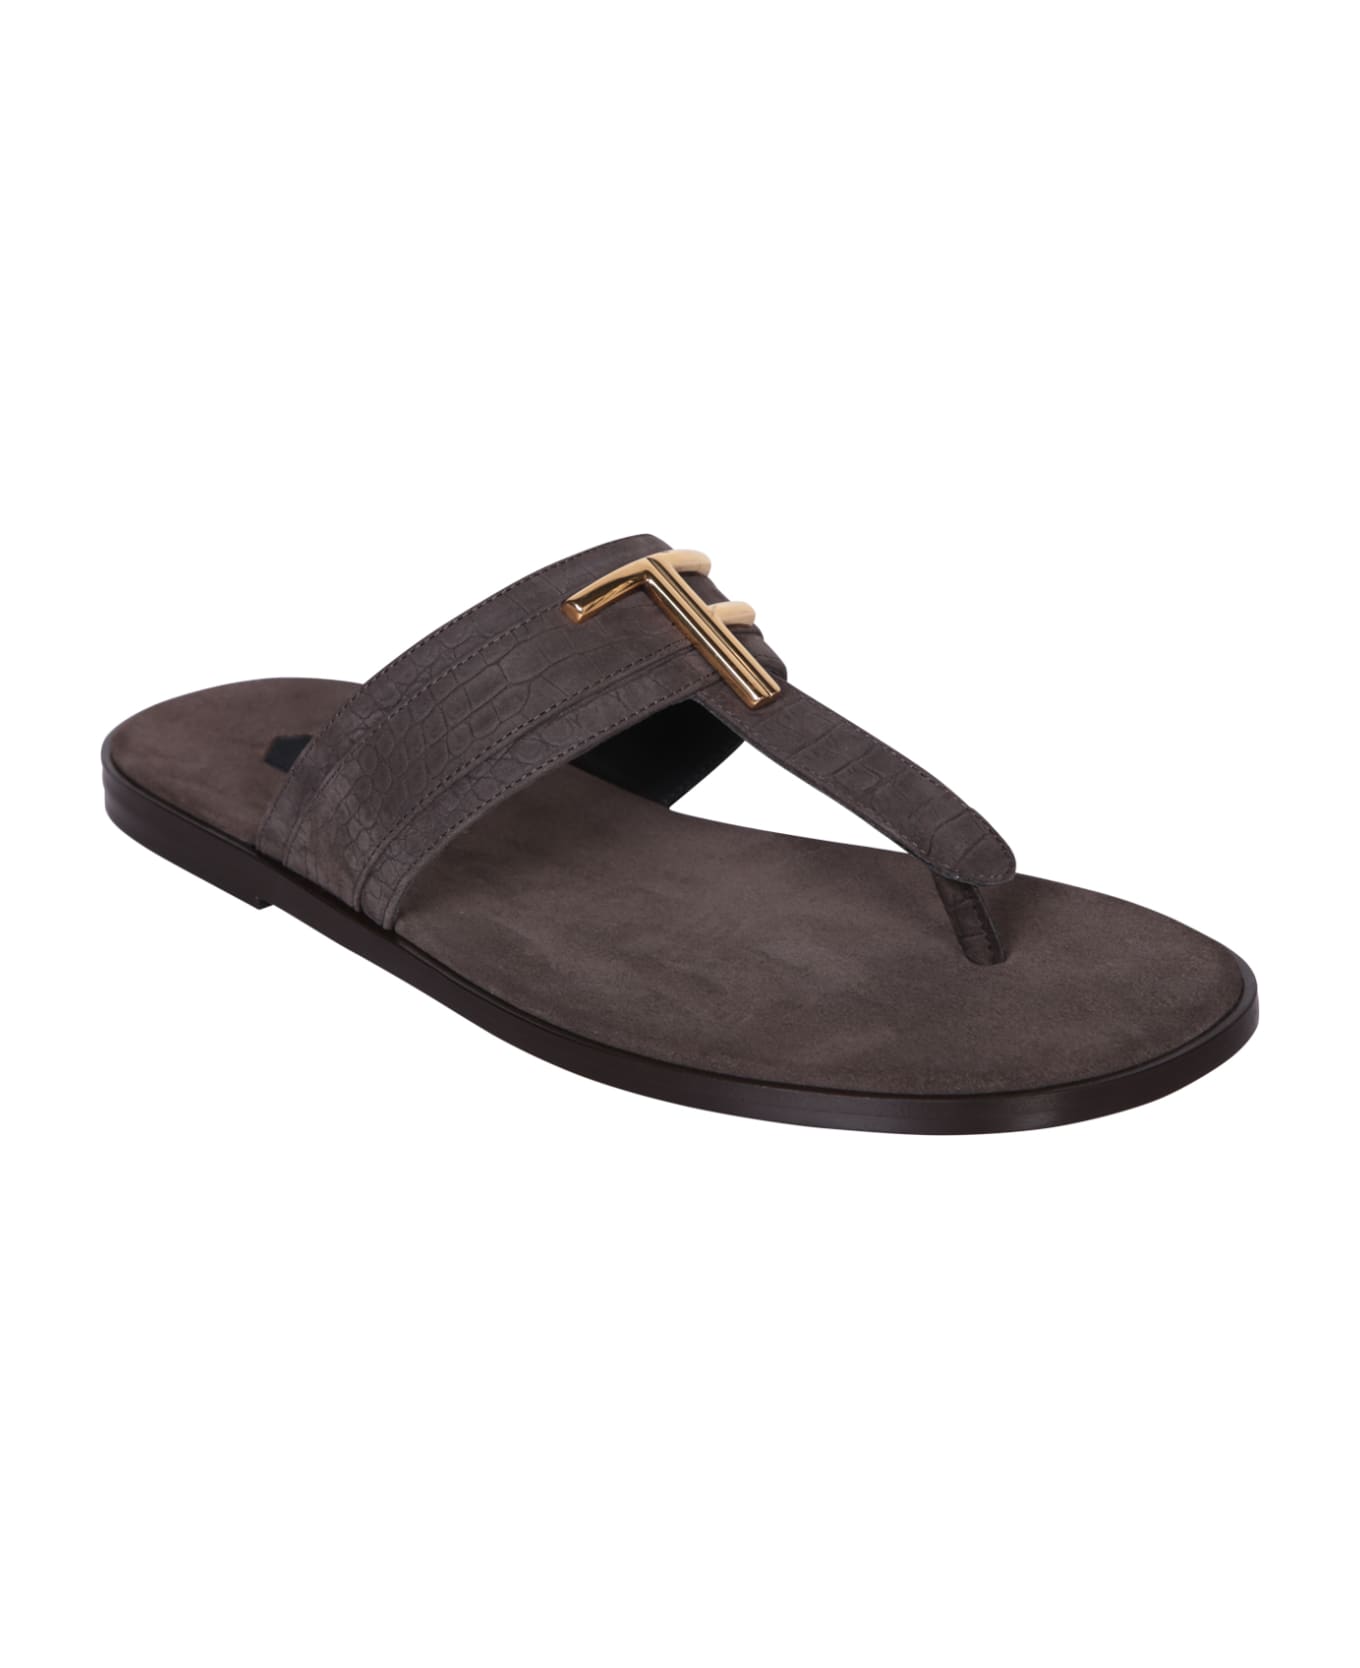 Tom Ford Brighton Crododile Brown Sandals - Brown その他各種シューズ